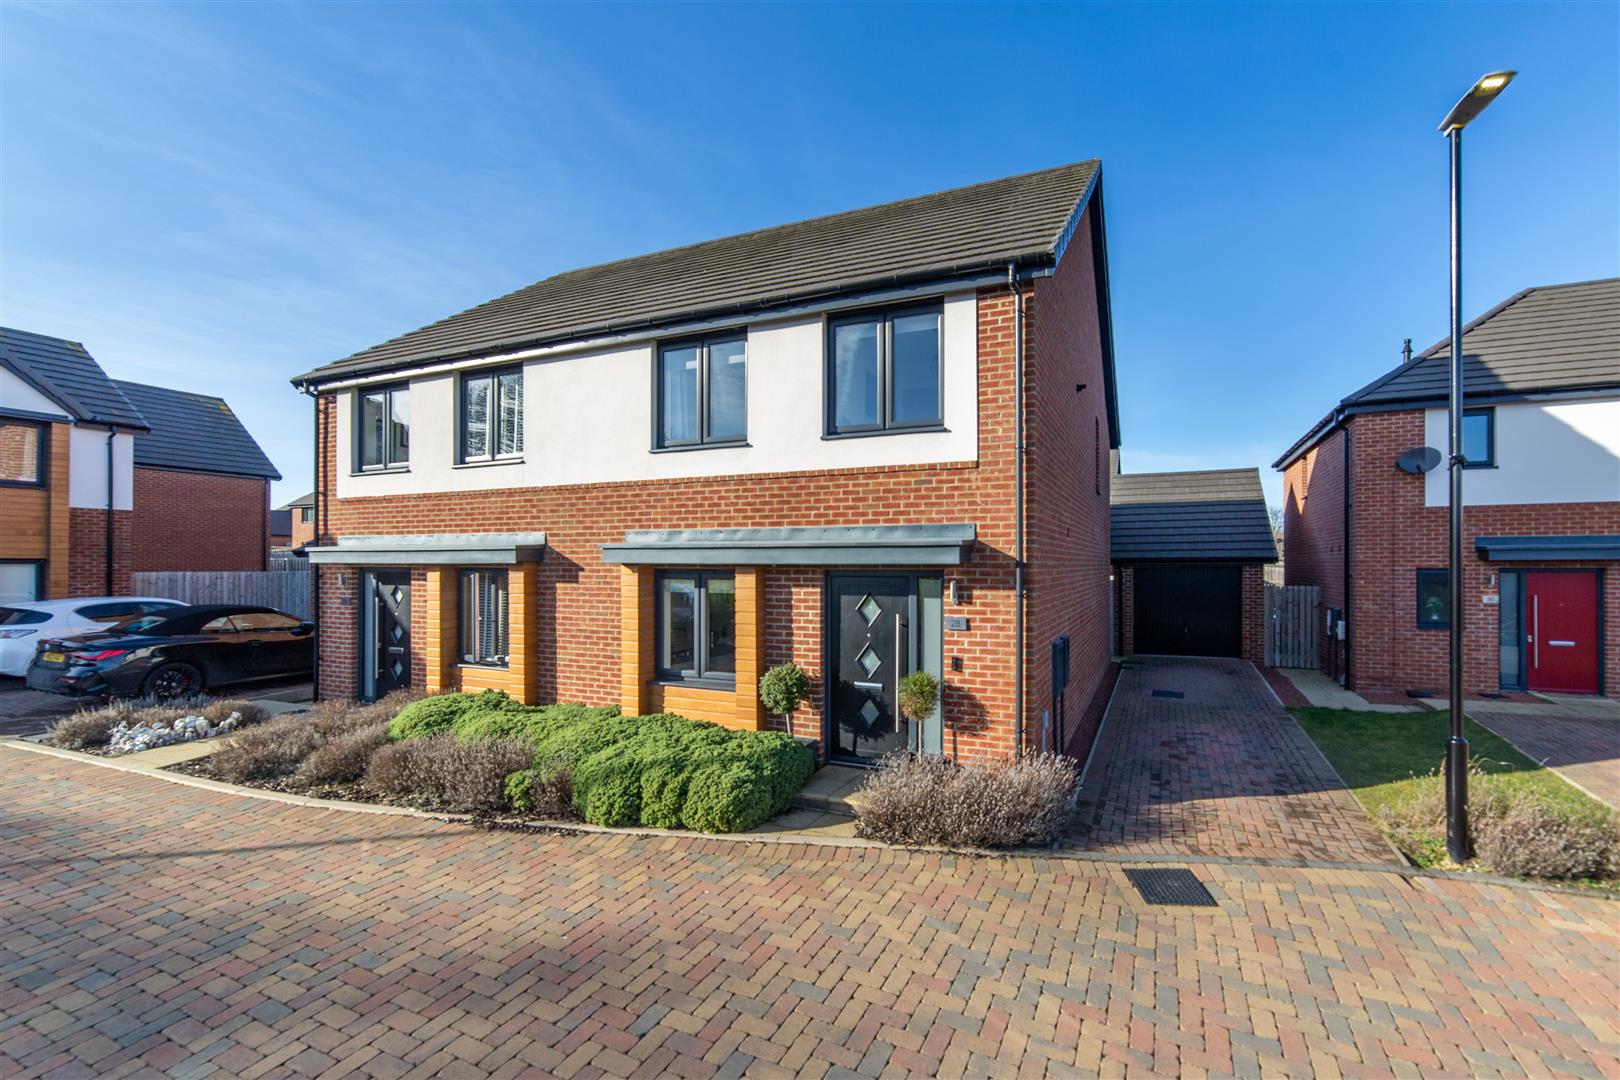 3 bed semi-detached house for sale in Foxfield Close, Newcastle Upon Tyne, NE13